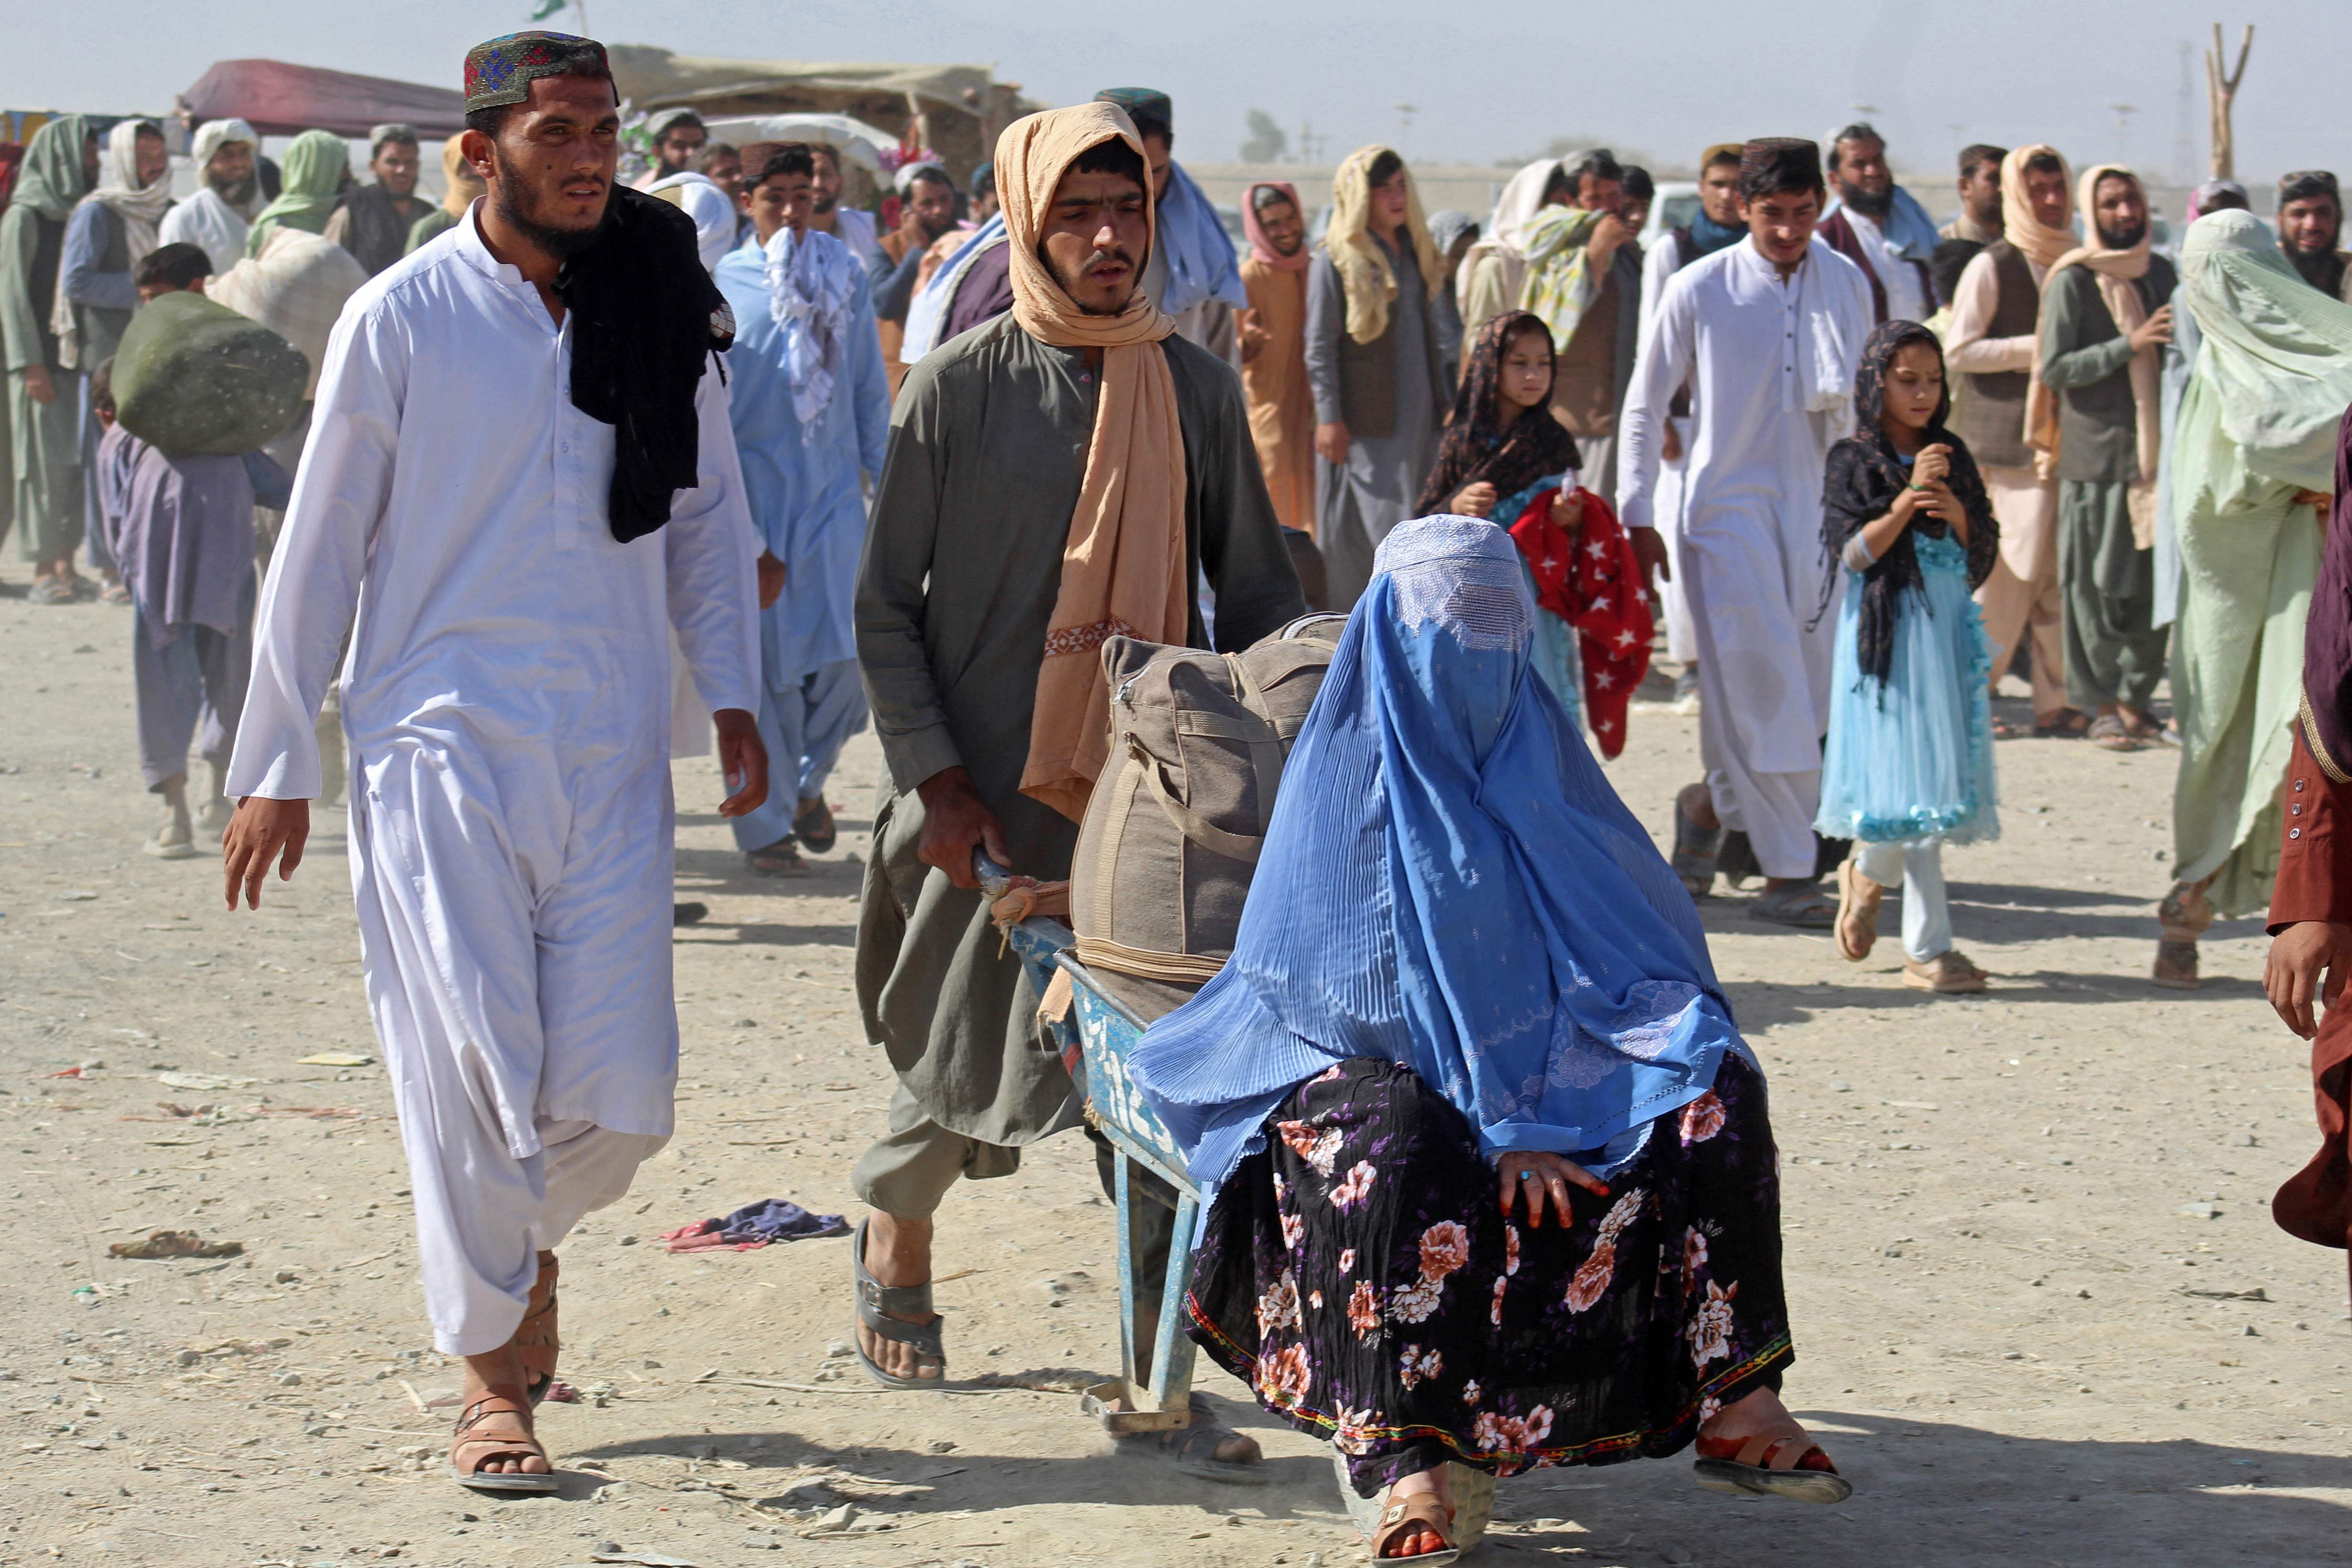 The UN in Afghanistan flew the people from Kabul to Almaty on August 22. Credit: AFP Photo